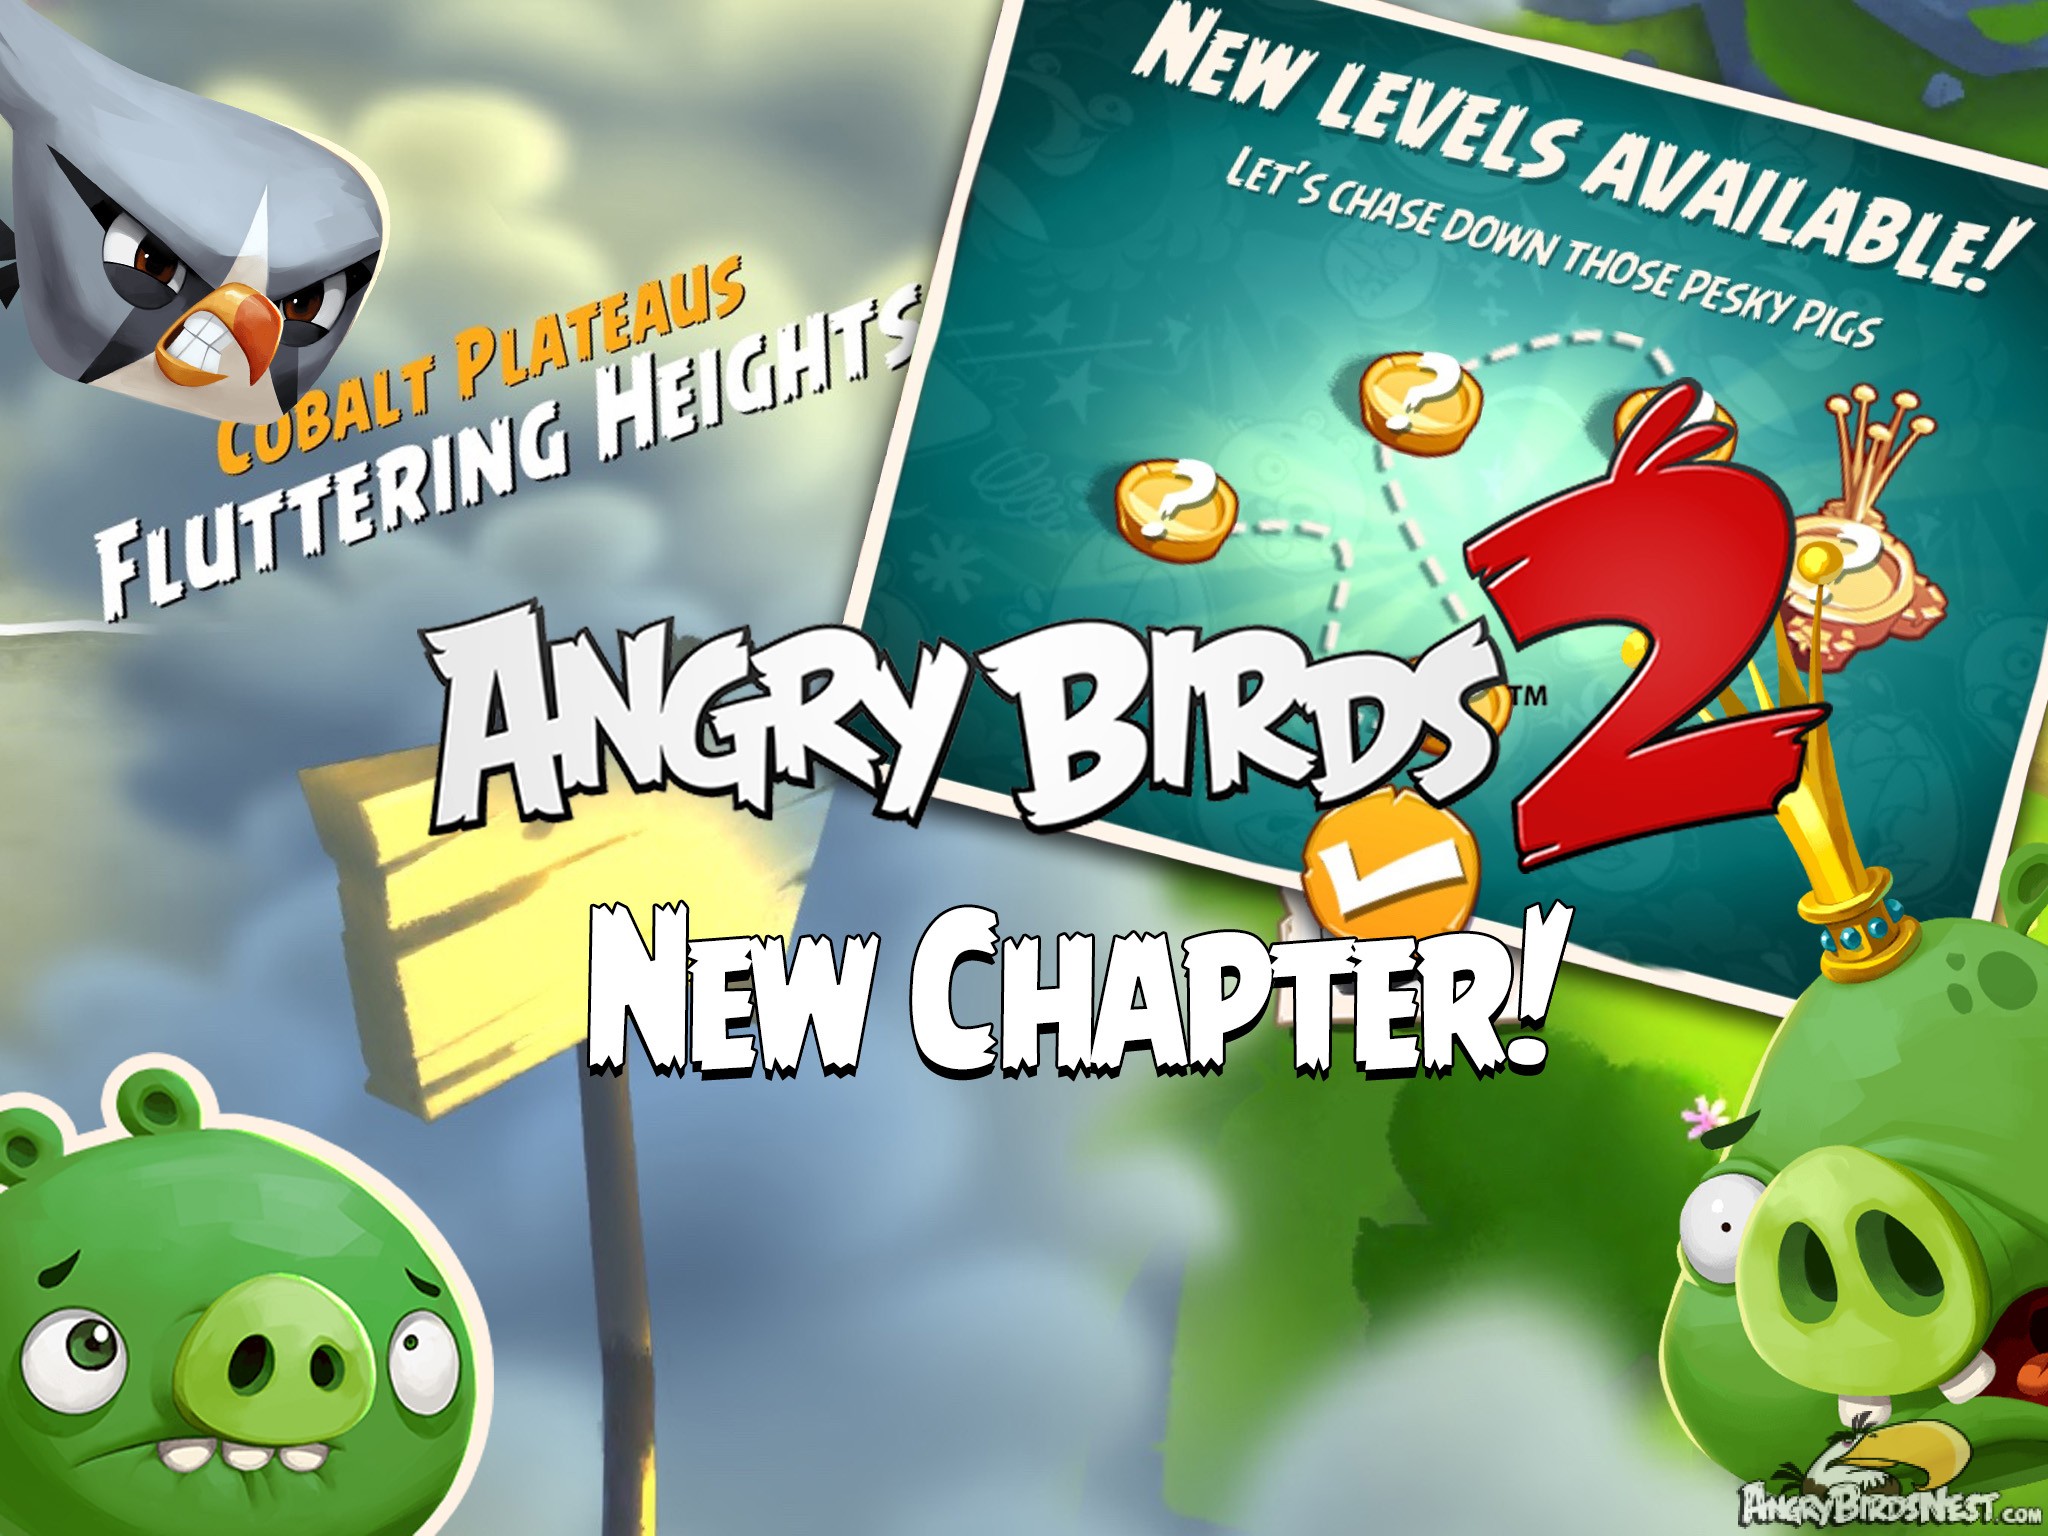 Angry Birds 2 Update Fluttering Heights Feature Image